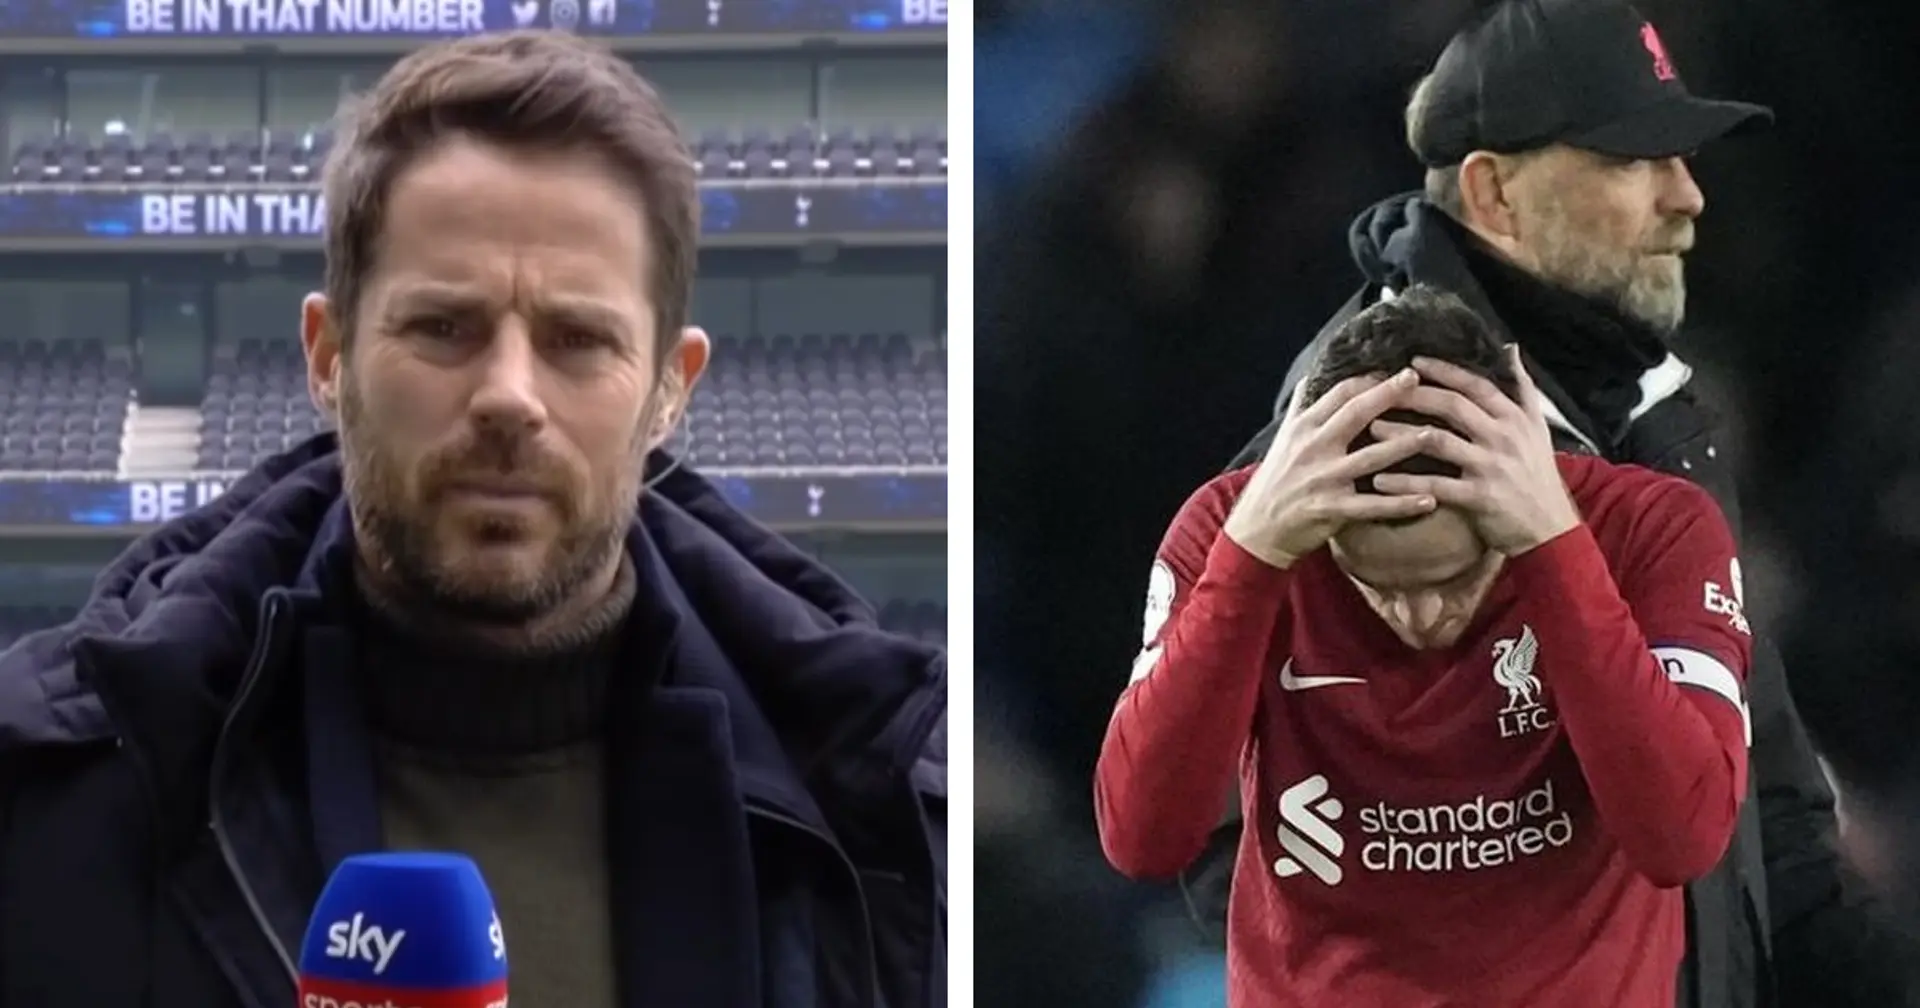 'Brighton wanted it more': Redknapp slams Liverpool mentality in embarrassing defeat